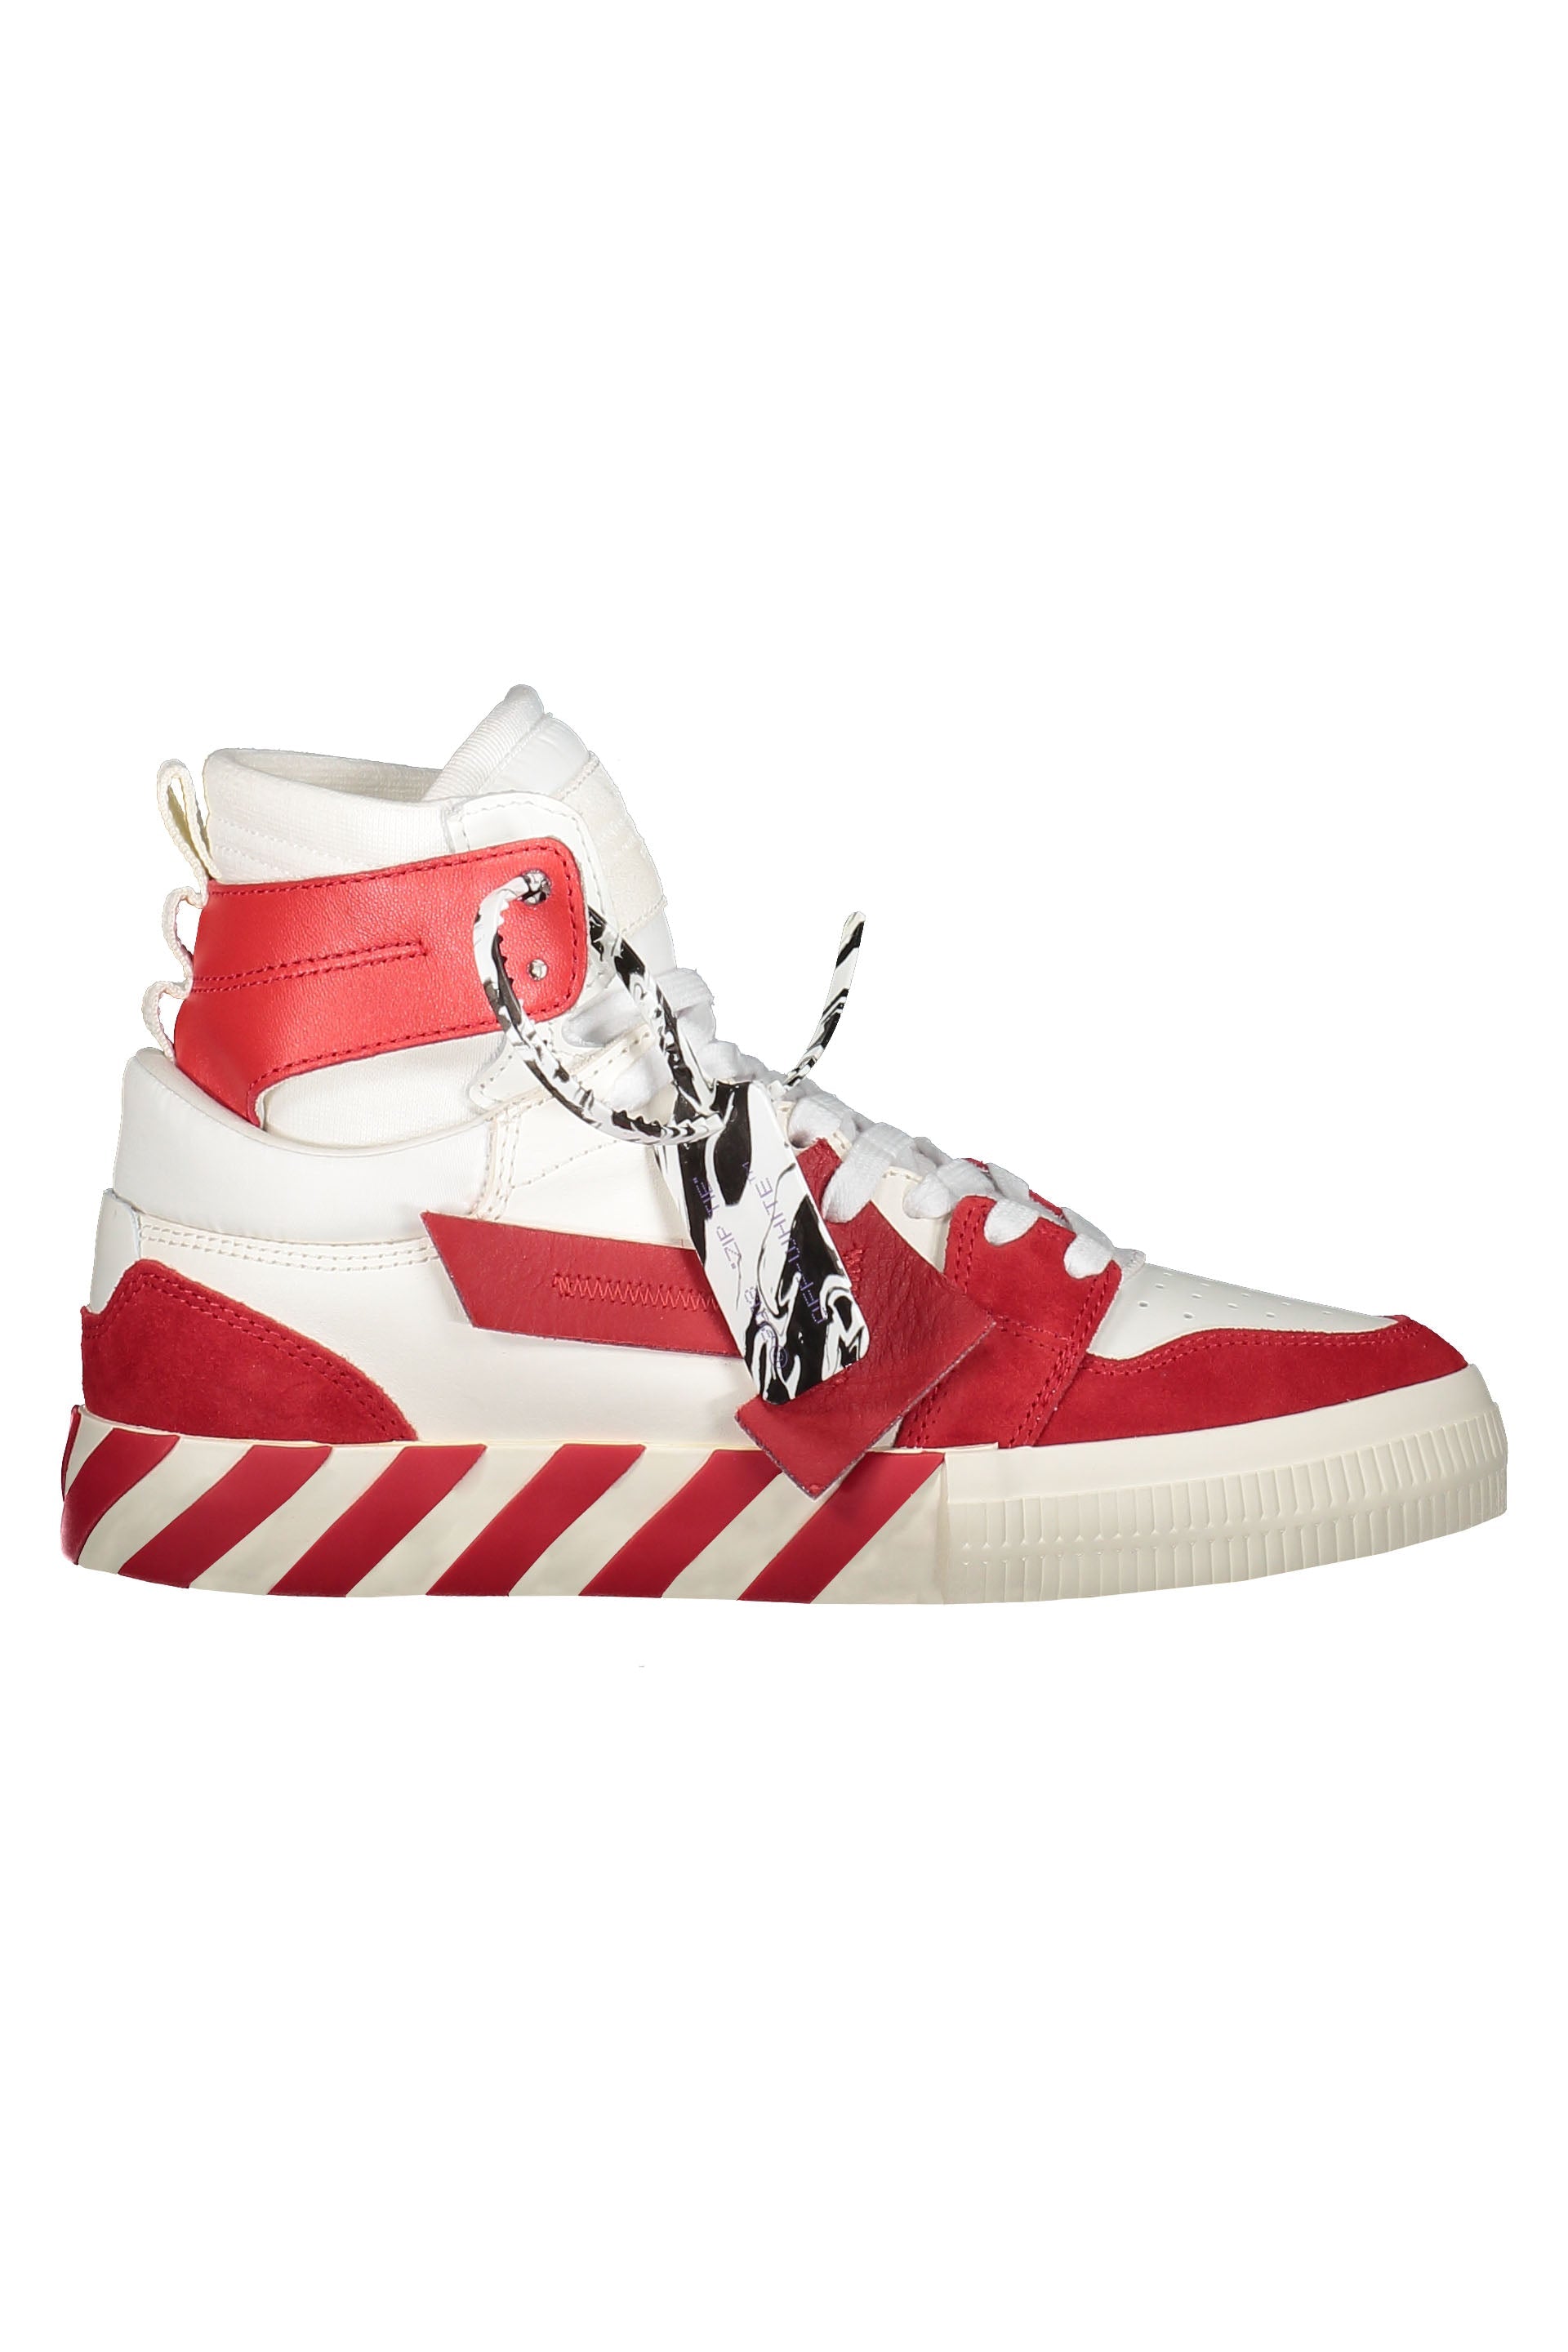 Off-White-OUTLET-SALE-Vulcanized-High-top-sneakers-Sneakers-39-ARCHIVE-COLLECTION.jpg